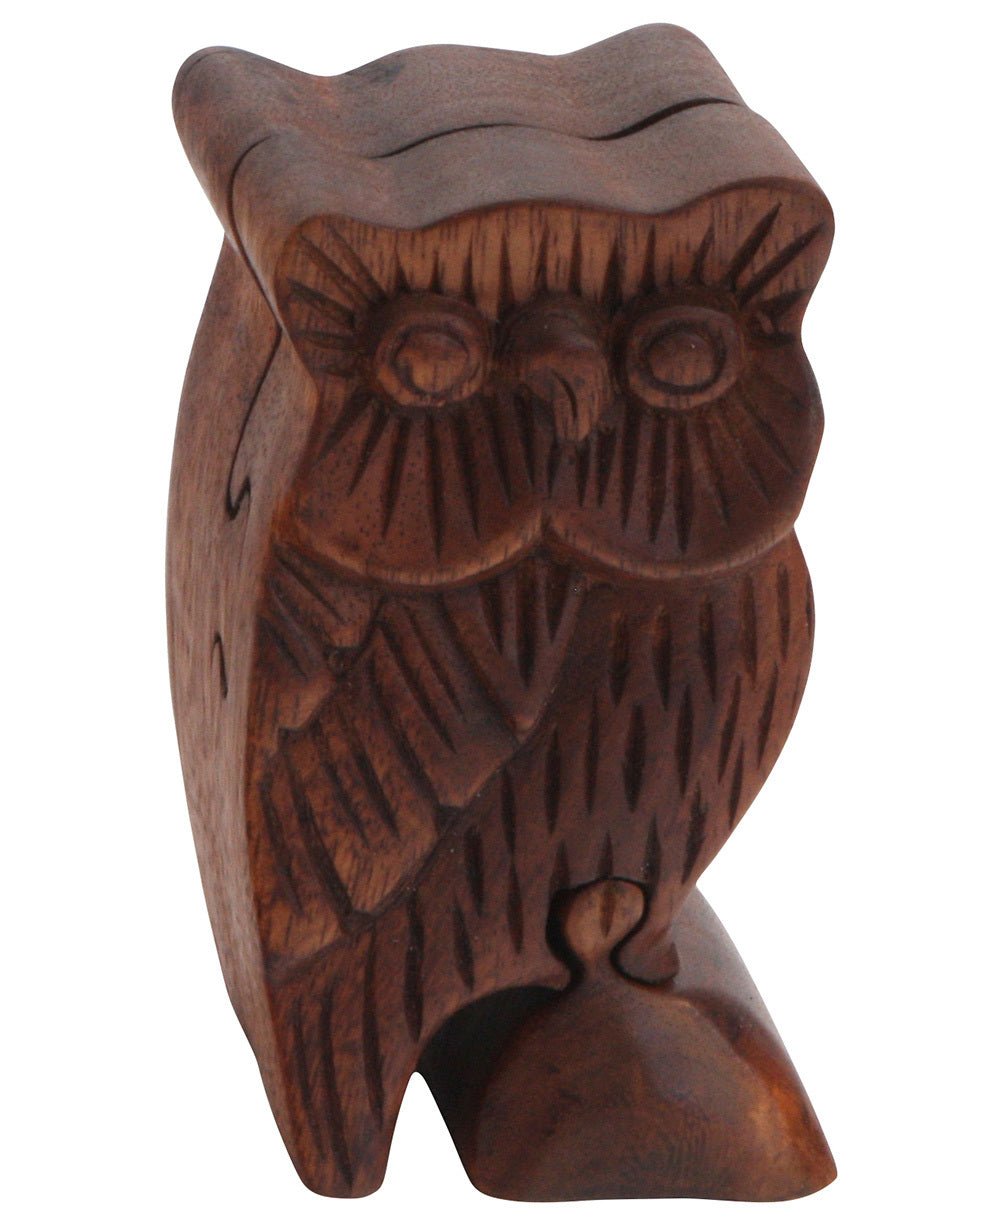 Wooden Owl Puzzle Box - Thoughtful Accents